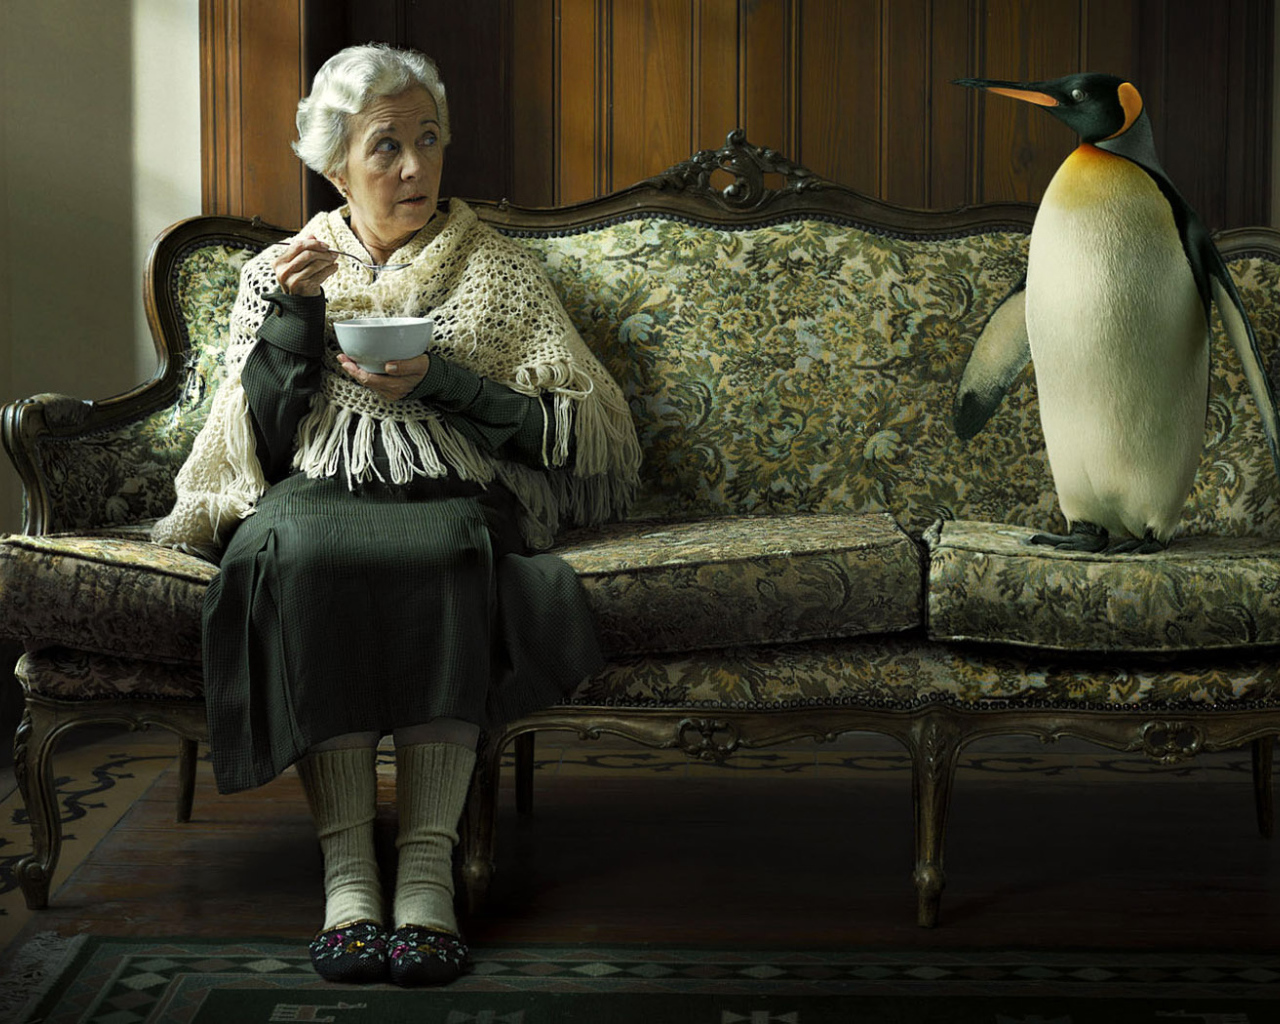 The old woman and penguin